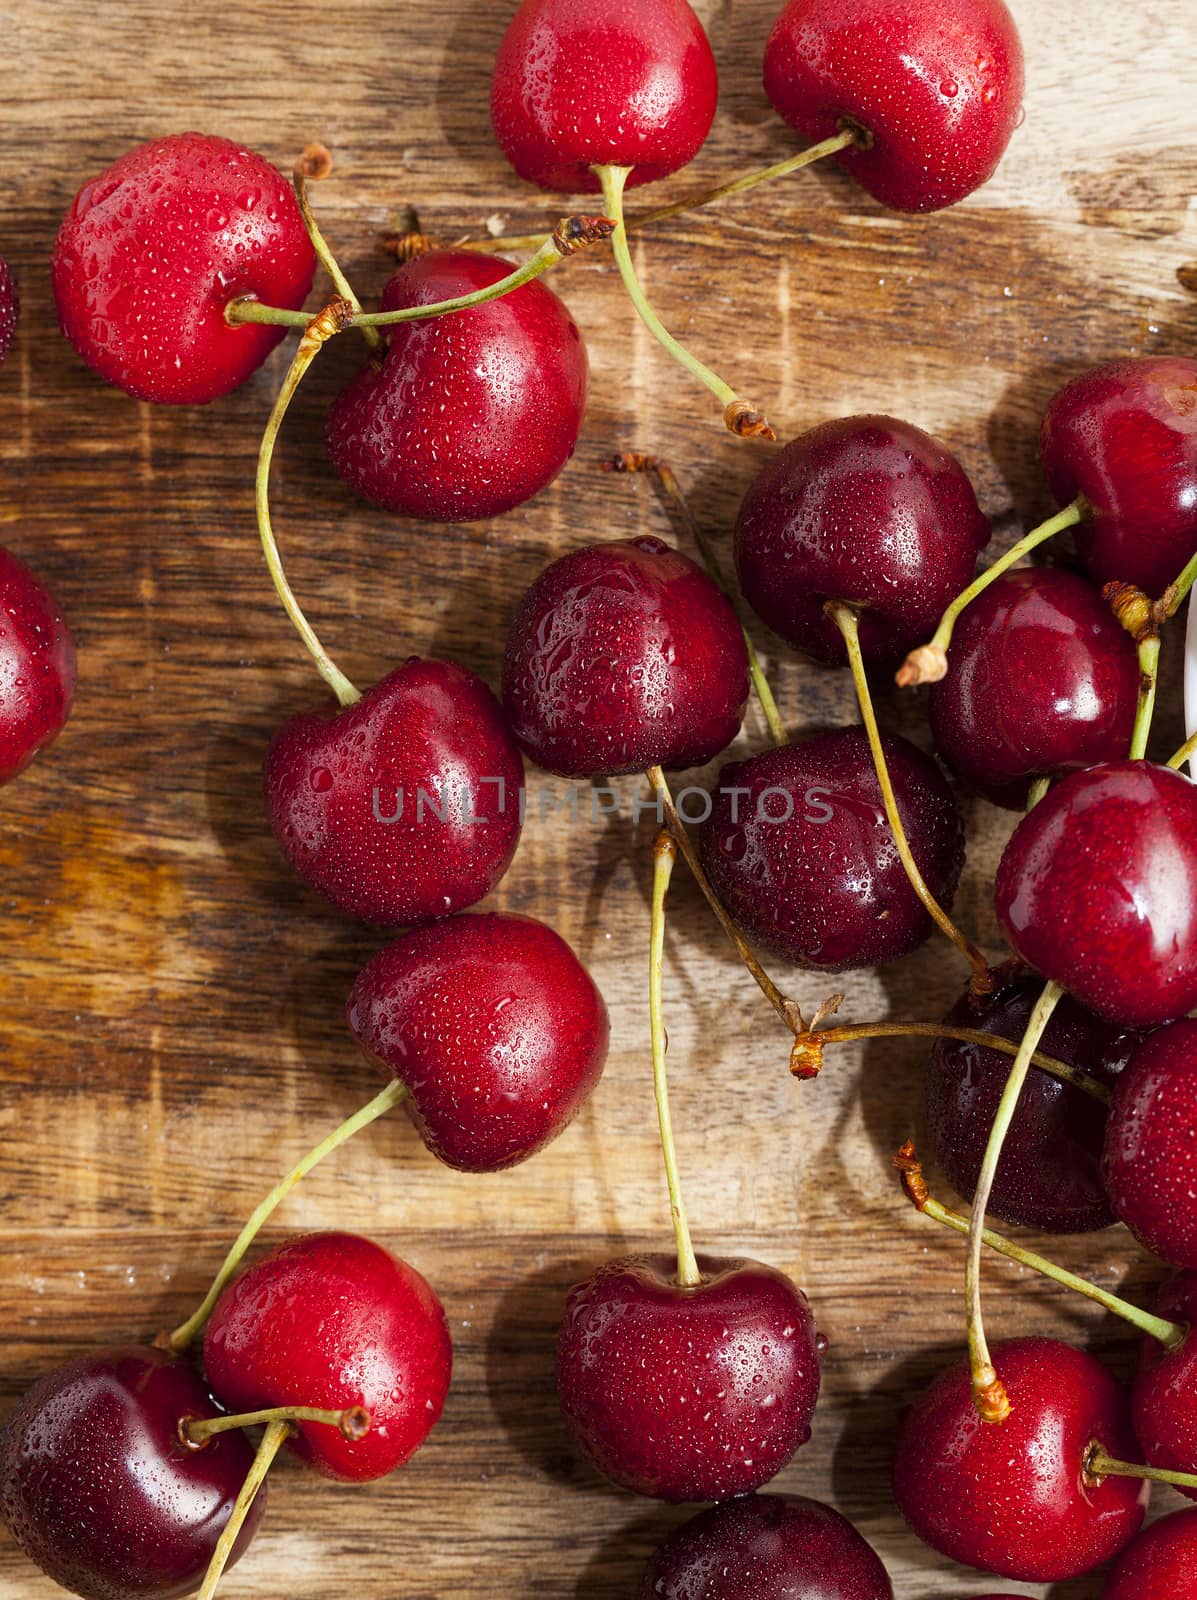 photographed close-up of ripe red cherries covered with water drops, shallow depth of field